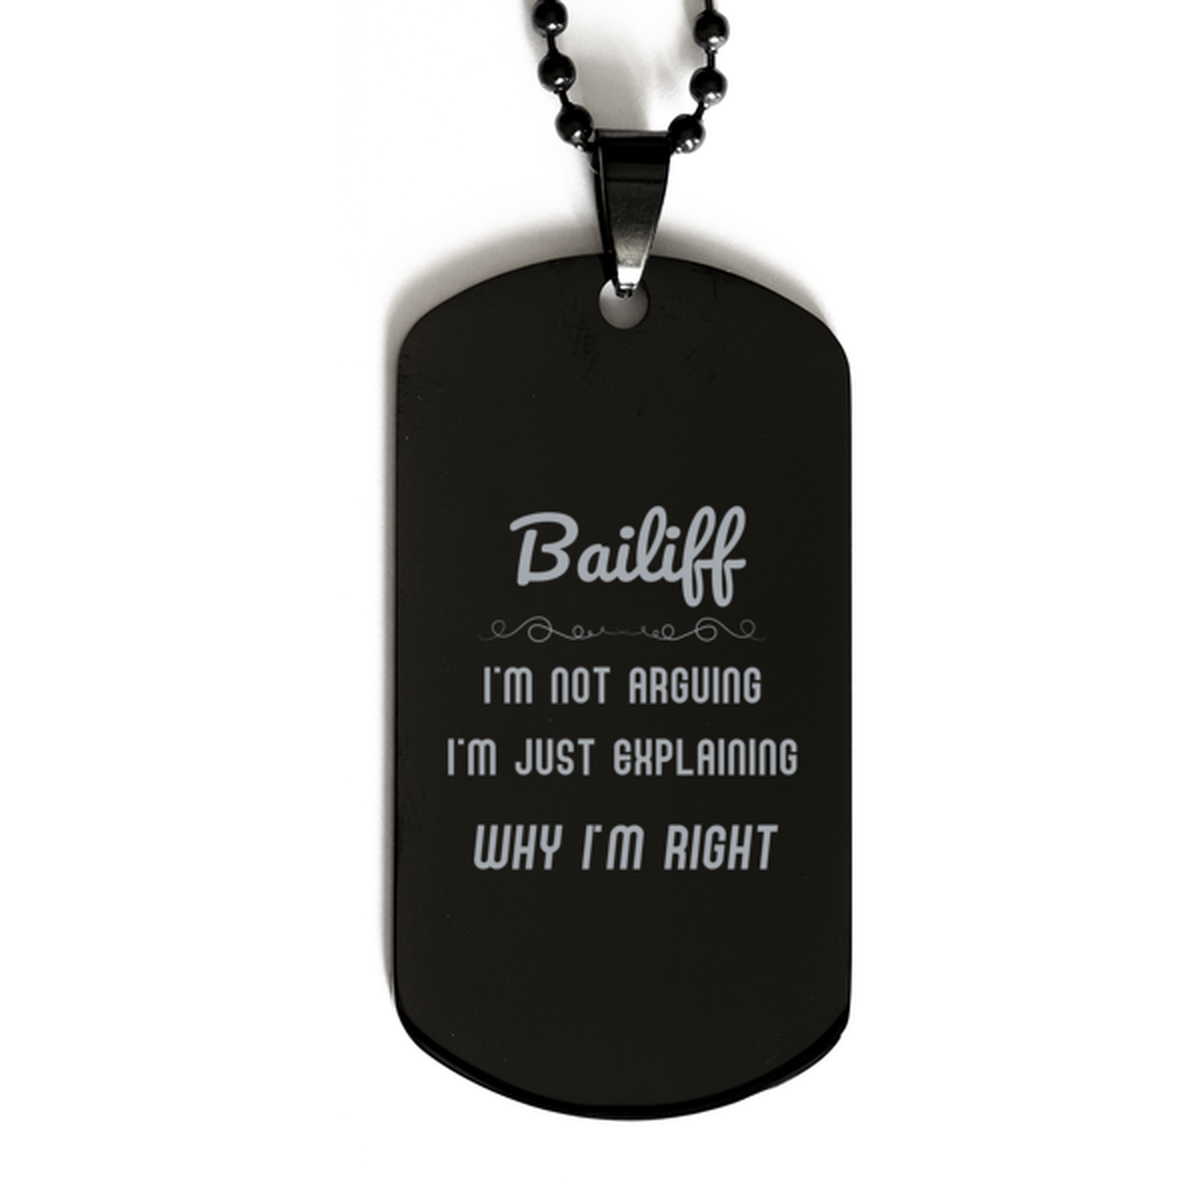 Bailiff I'm not Arguing. I'm Just Explaining Why I'm RIGHT Black Dog Tag, Funny Saying Quote Bailiff Gifts For Bailiff Graduation Birthday Christmas Gifts for Men Women Coworker